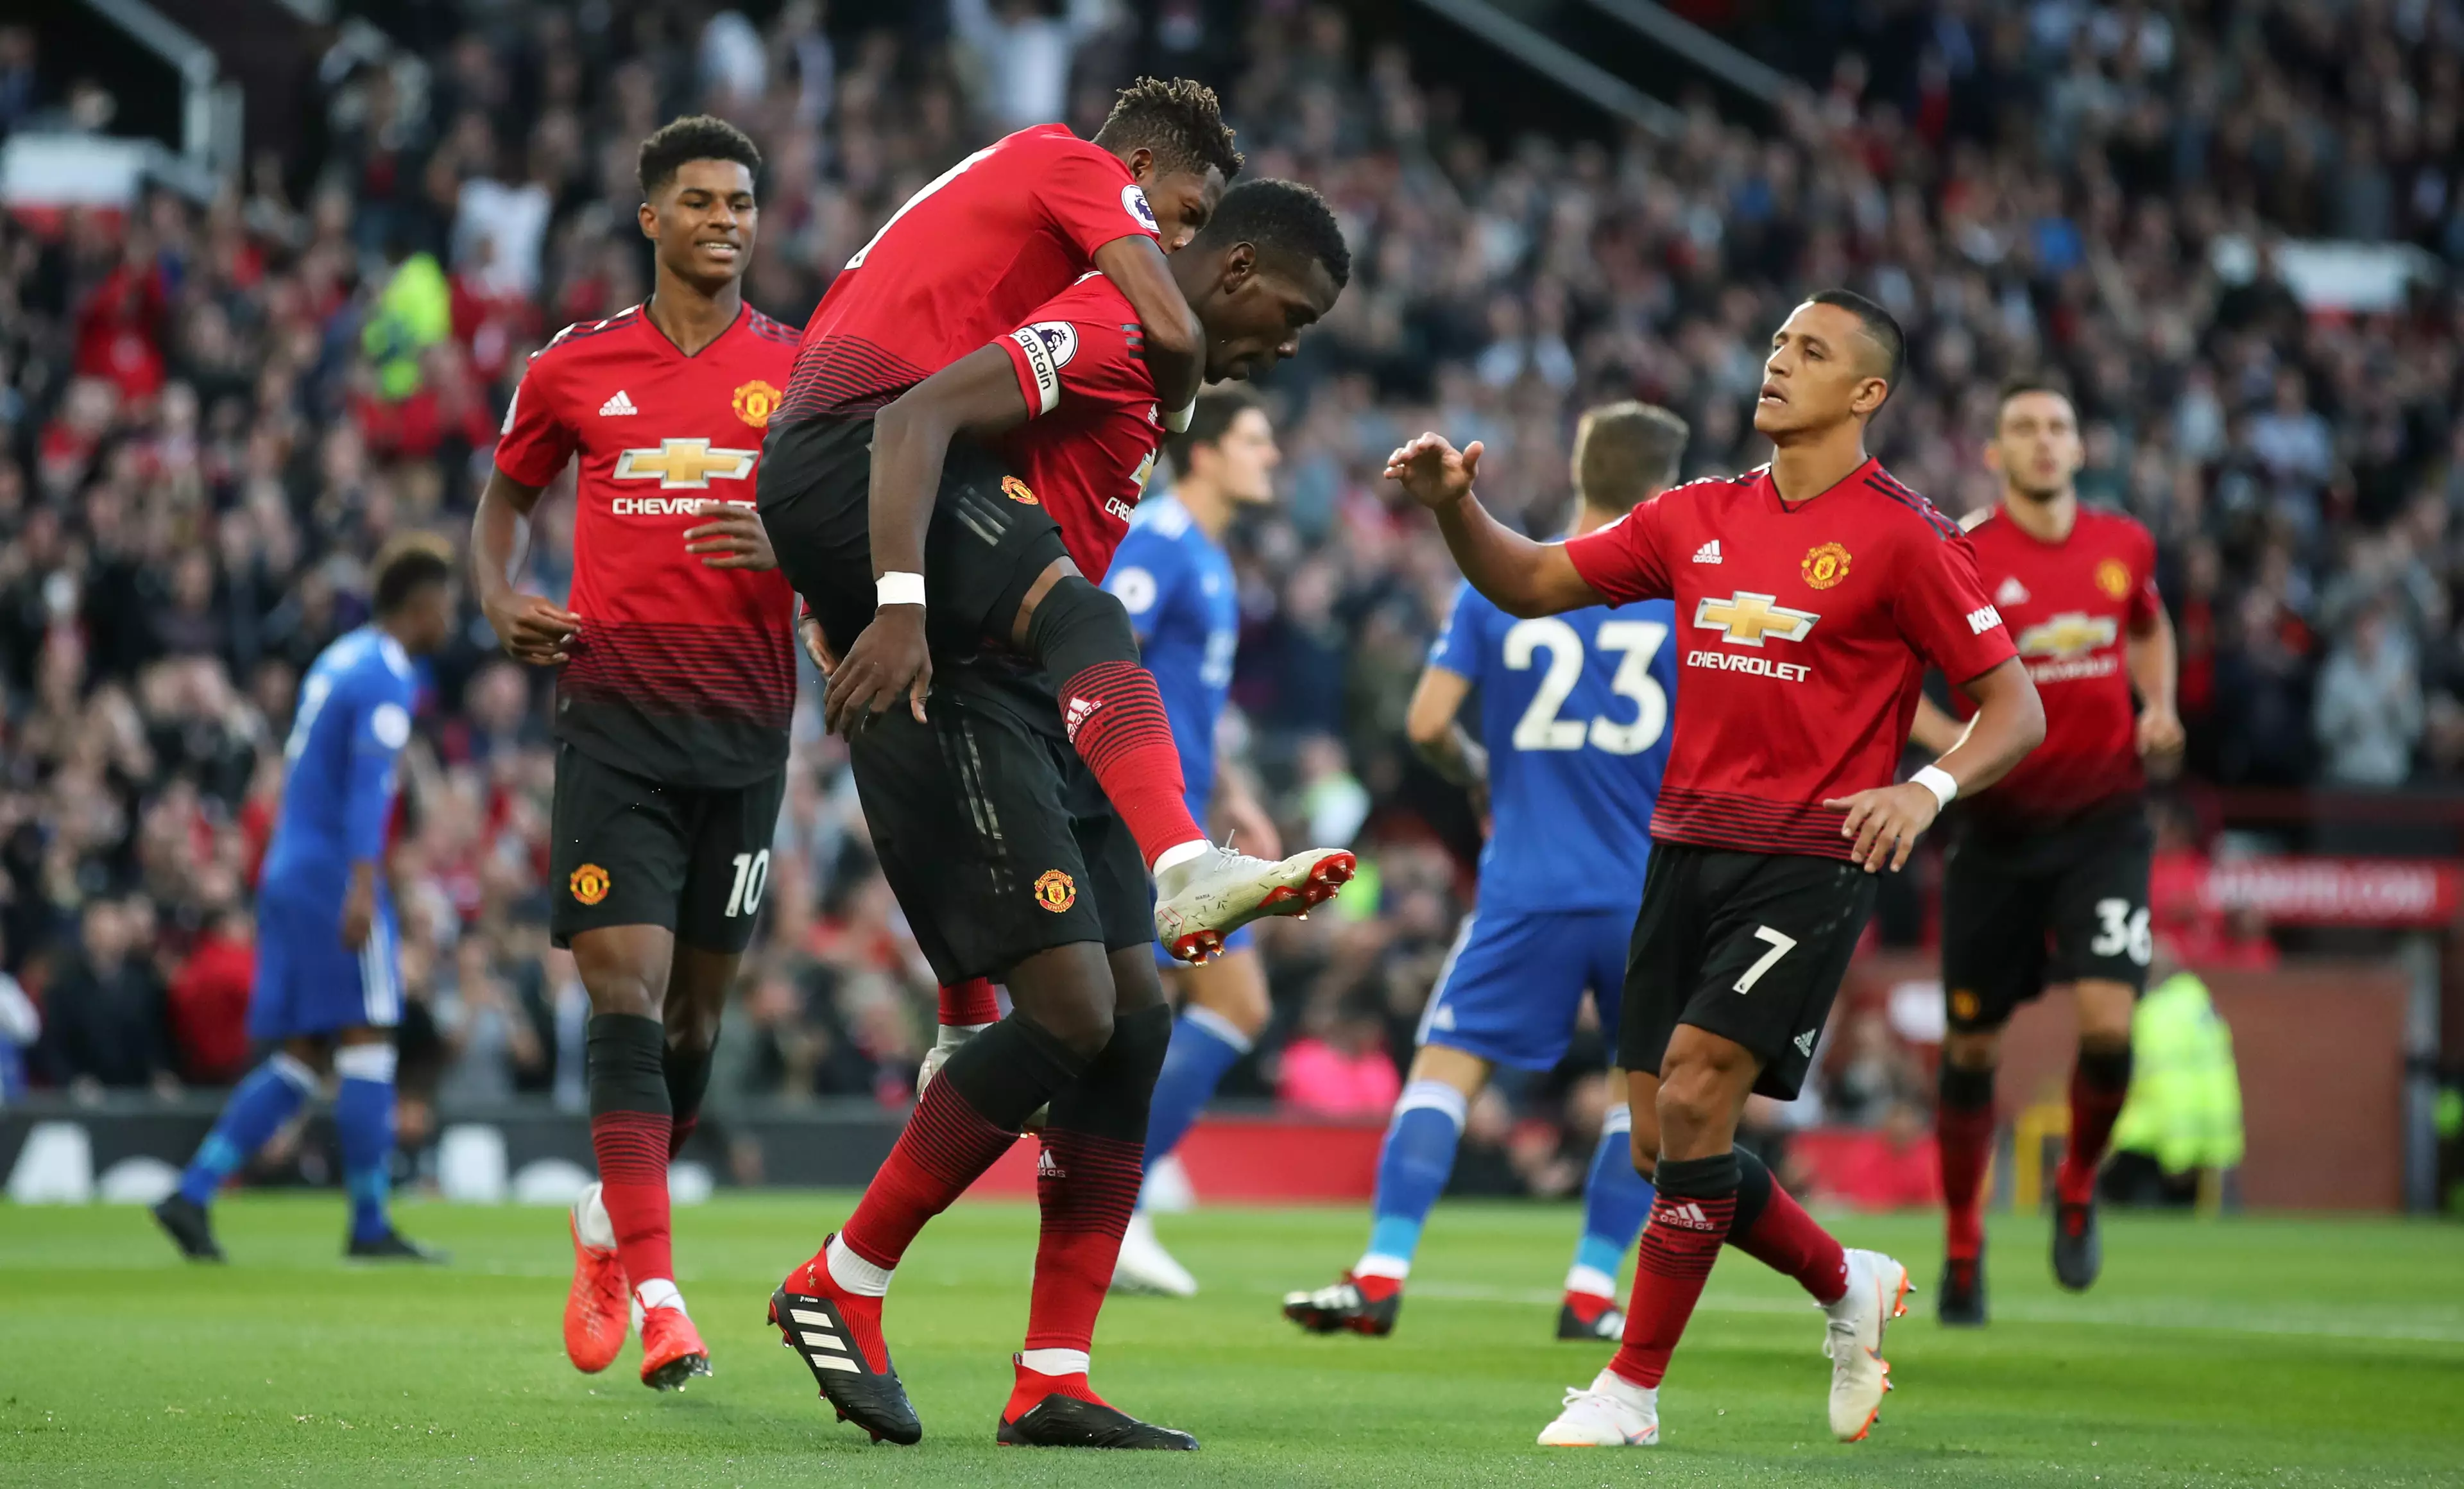 Pogba celebrates his goal against Leicester. Image: PA Images